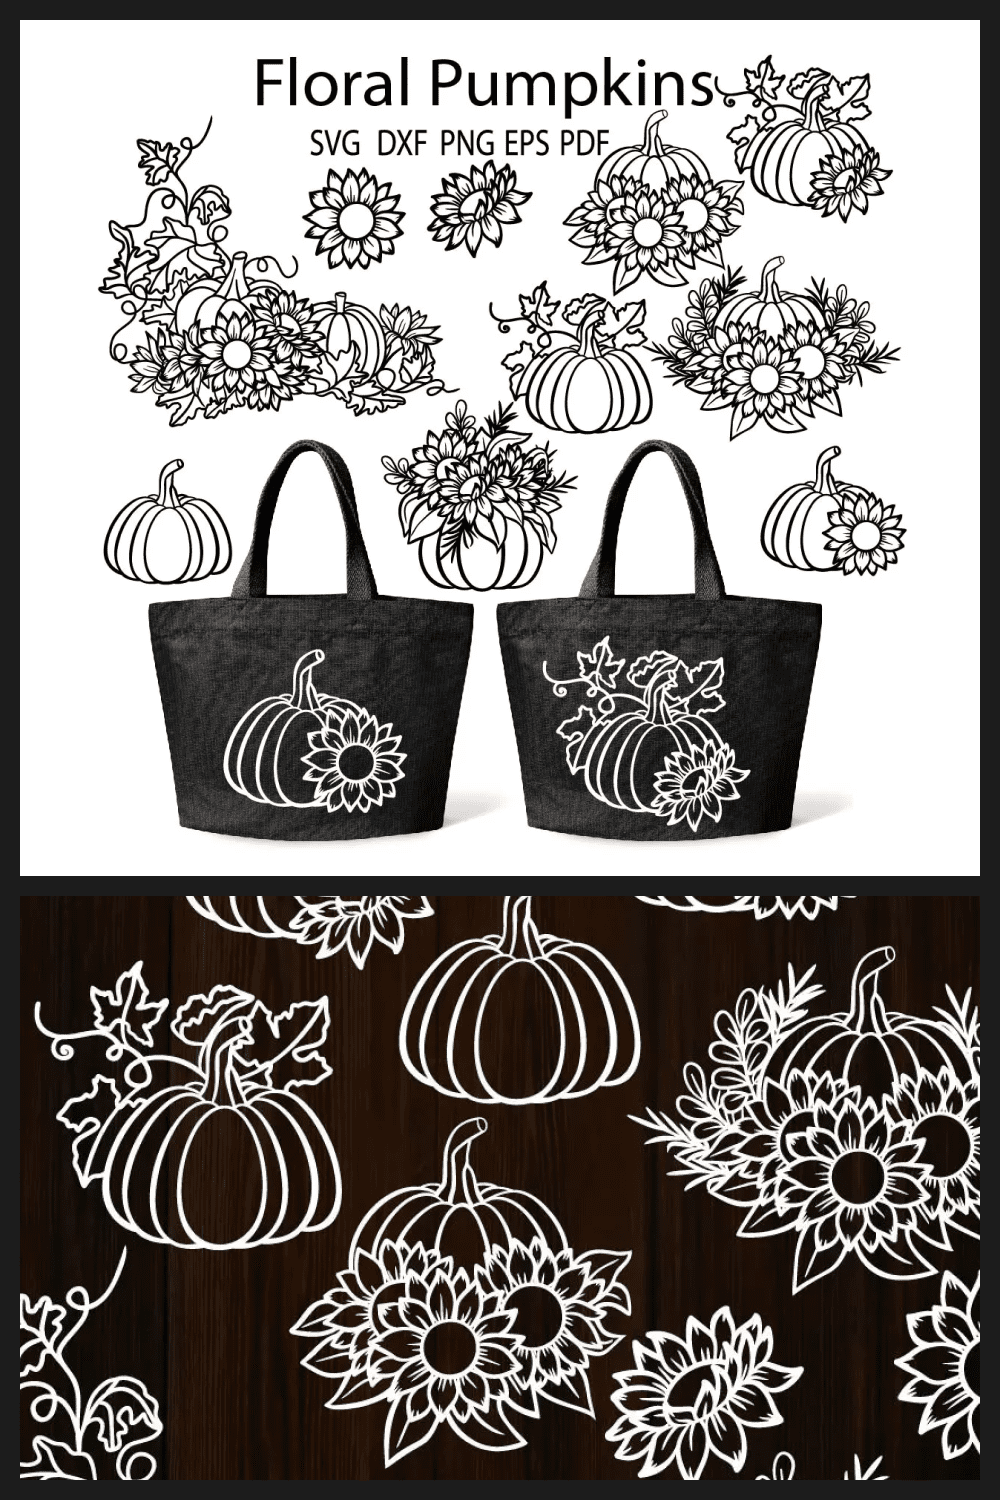 Collage with sketches of pumpkins, sunflowers and bags with pumpkin prints.